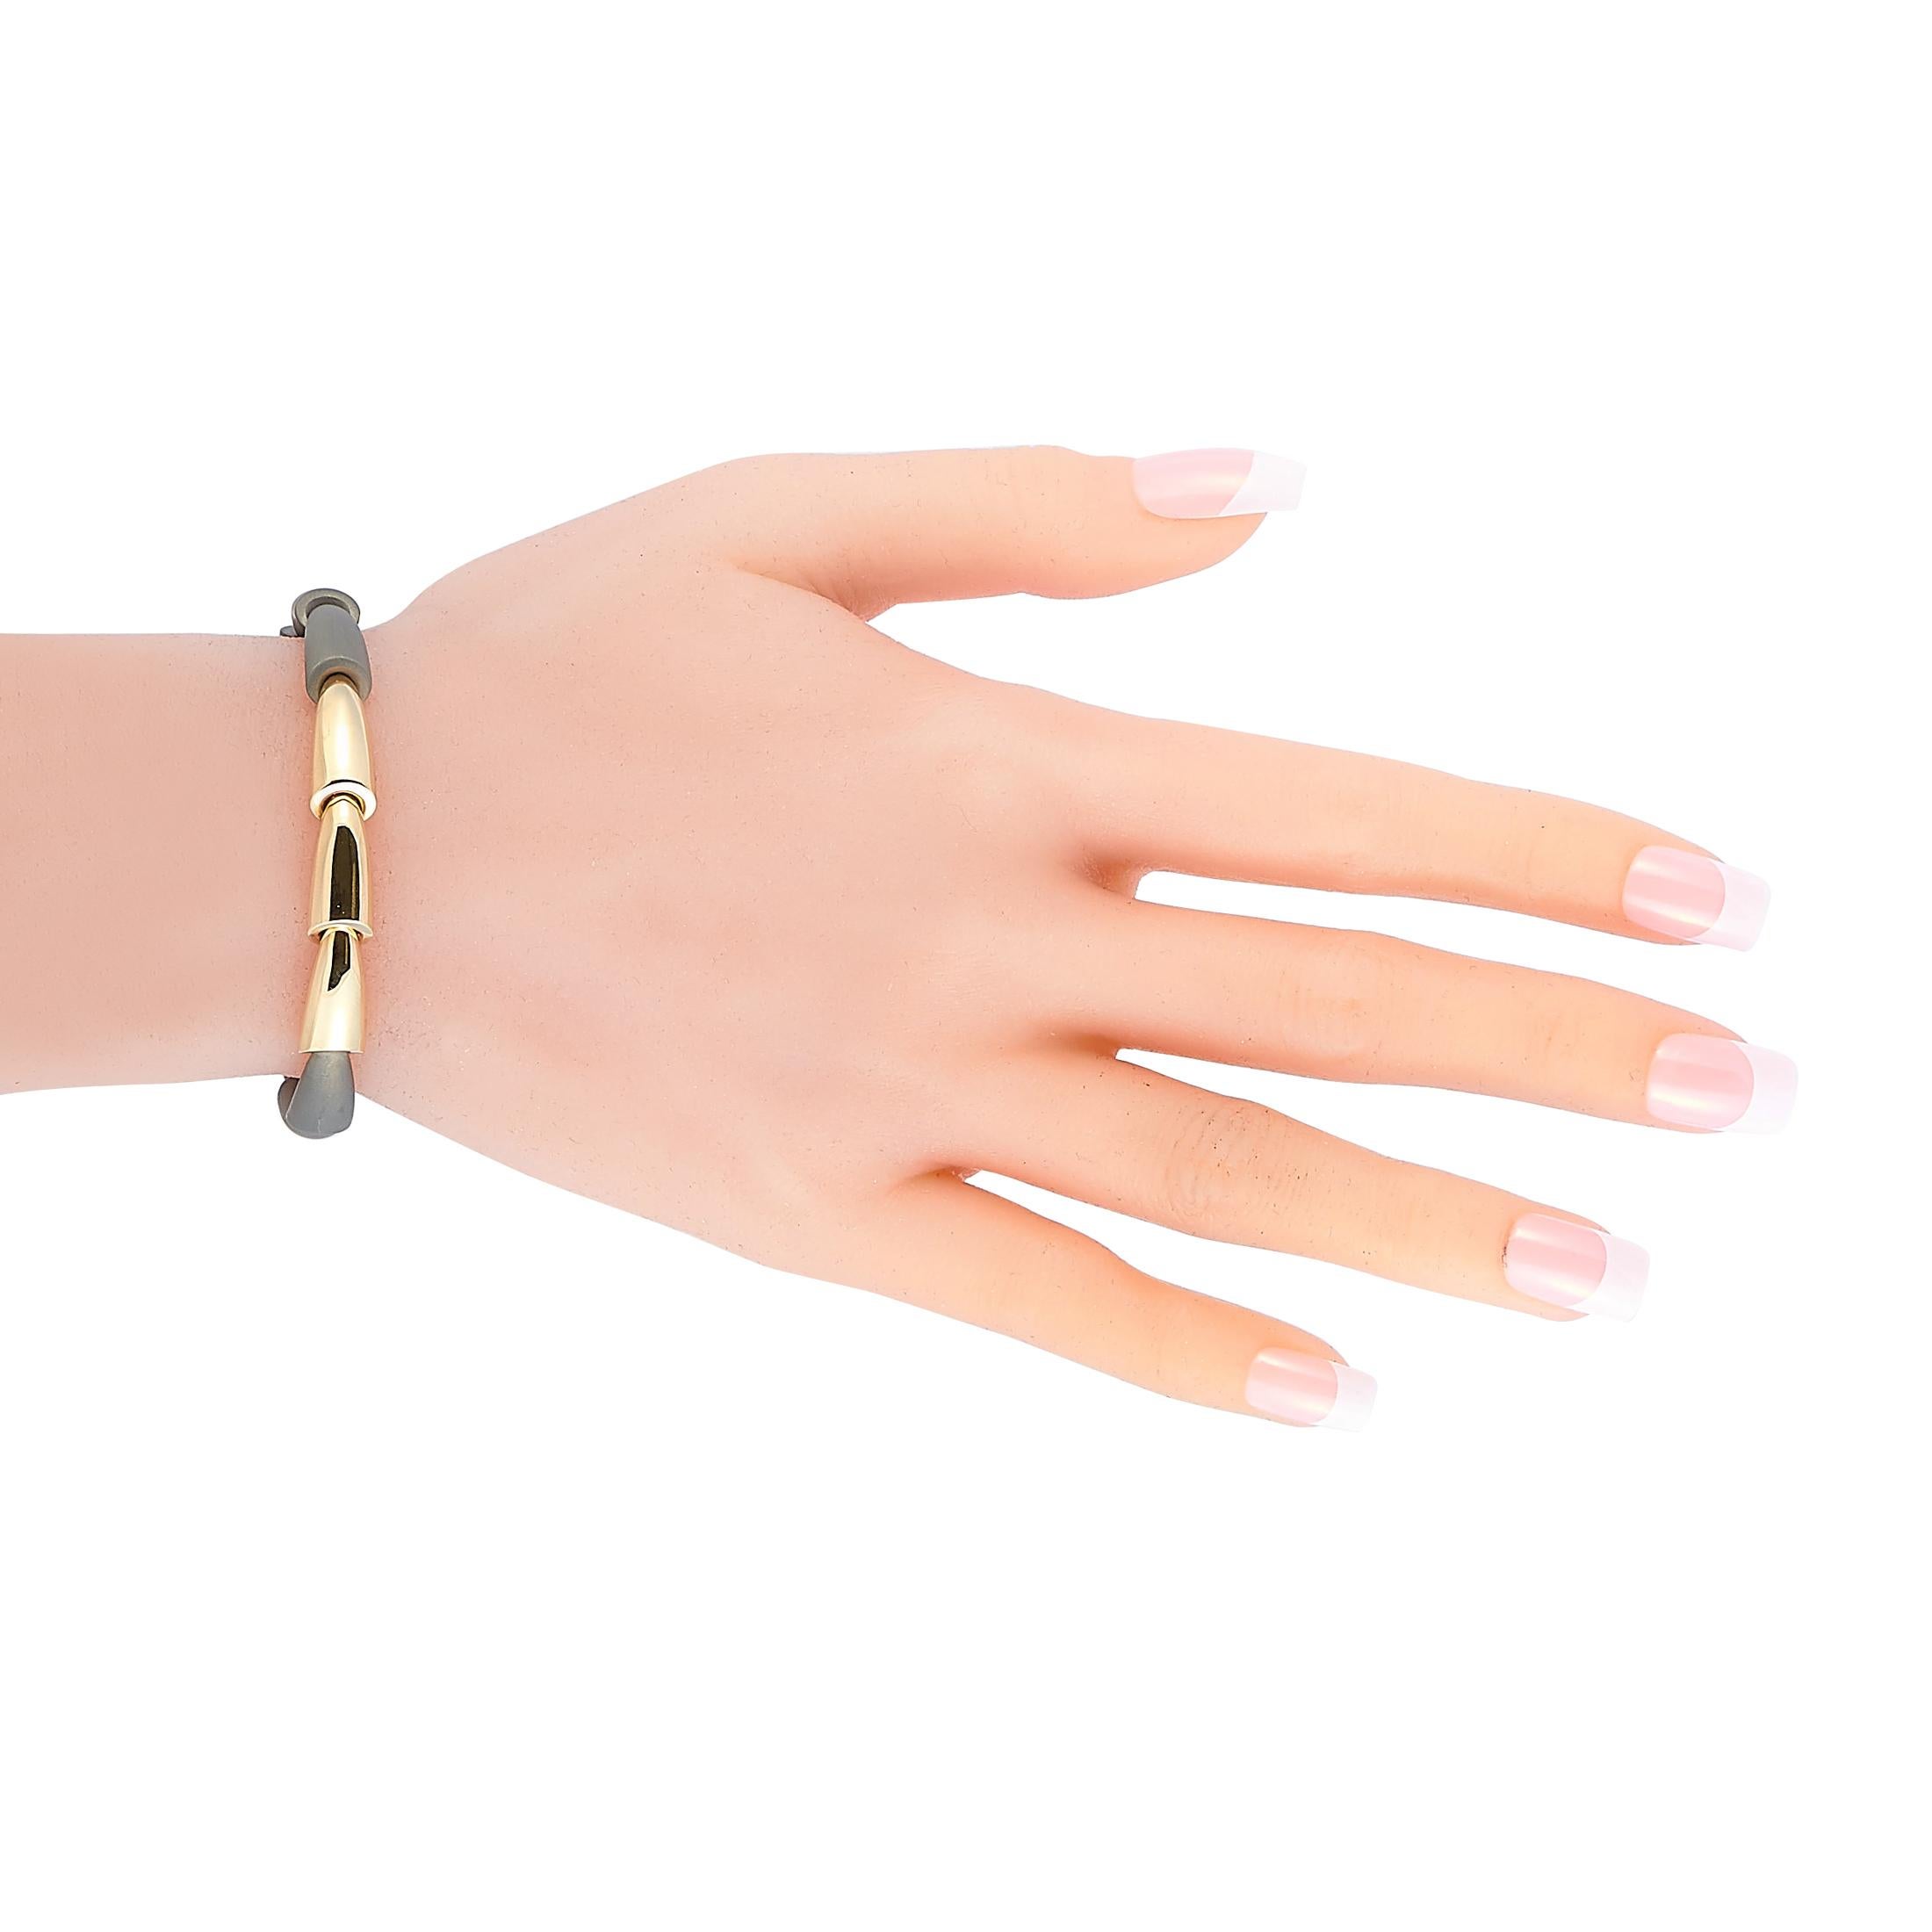 The Vhernier “Calla Media” bracelet is made out of 18K rose gold and titanium and weighs 16.8 grams, measuring 6.65” in length.

This jewelry piece is offered in brand new condition and includes the manufacturer’s box.